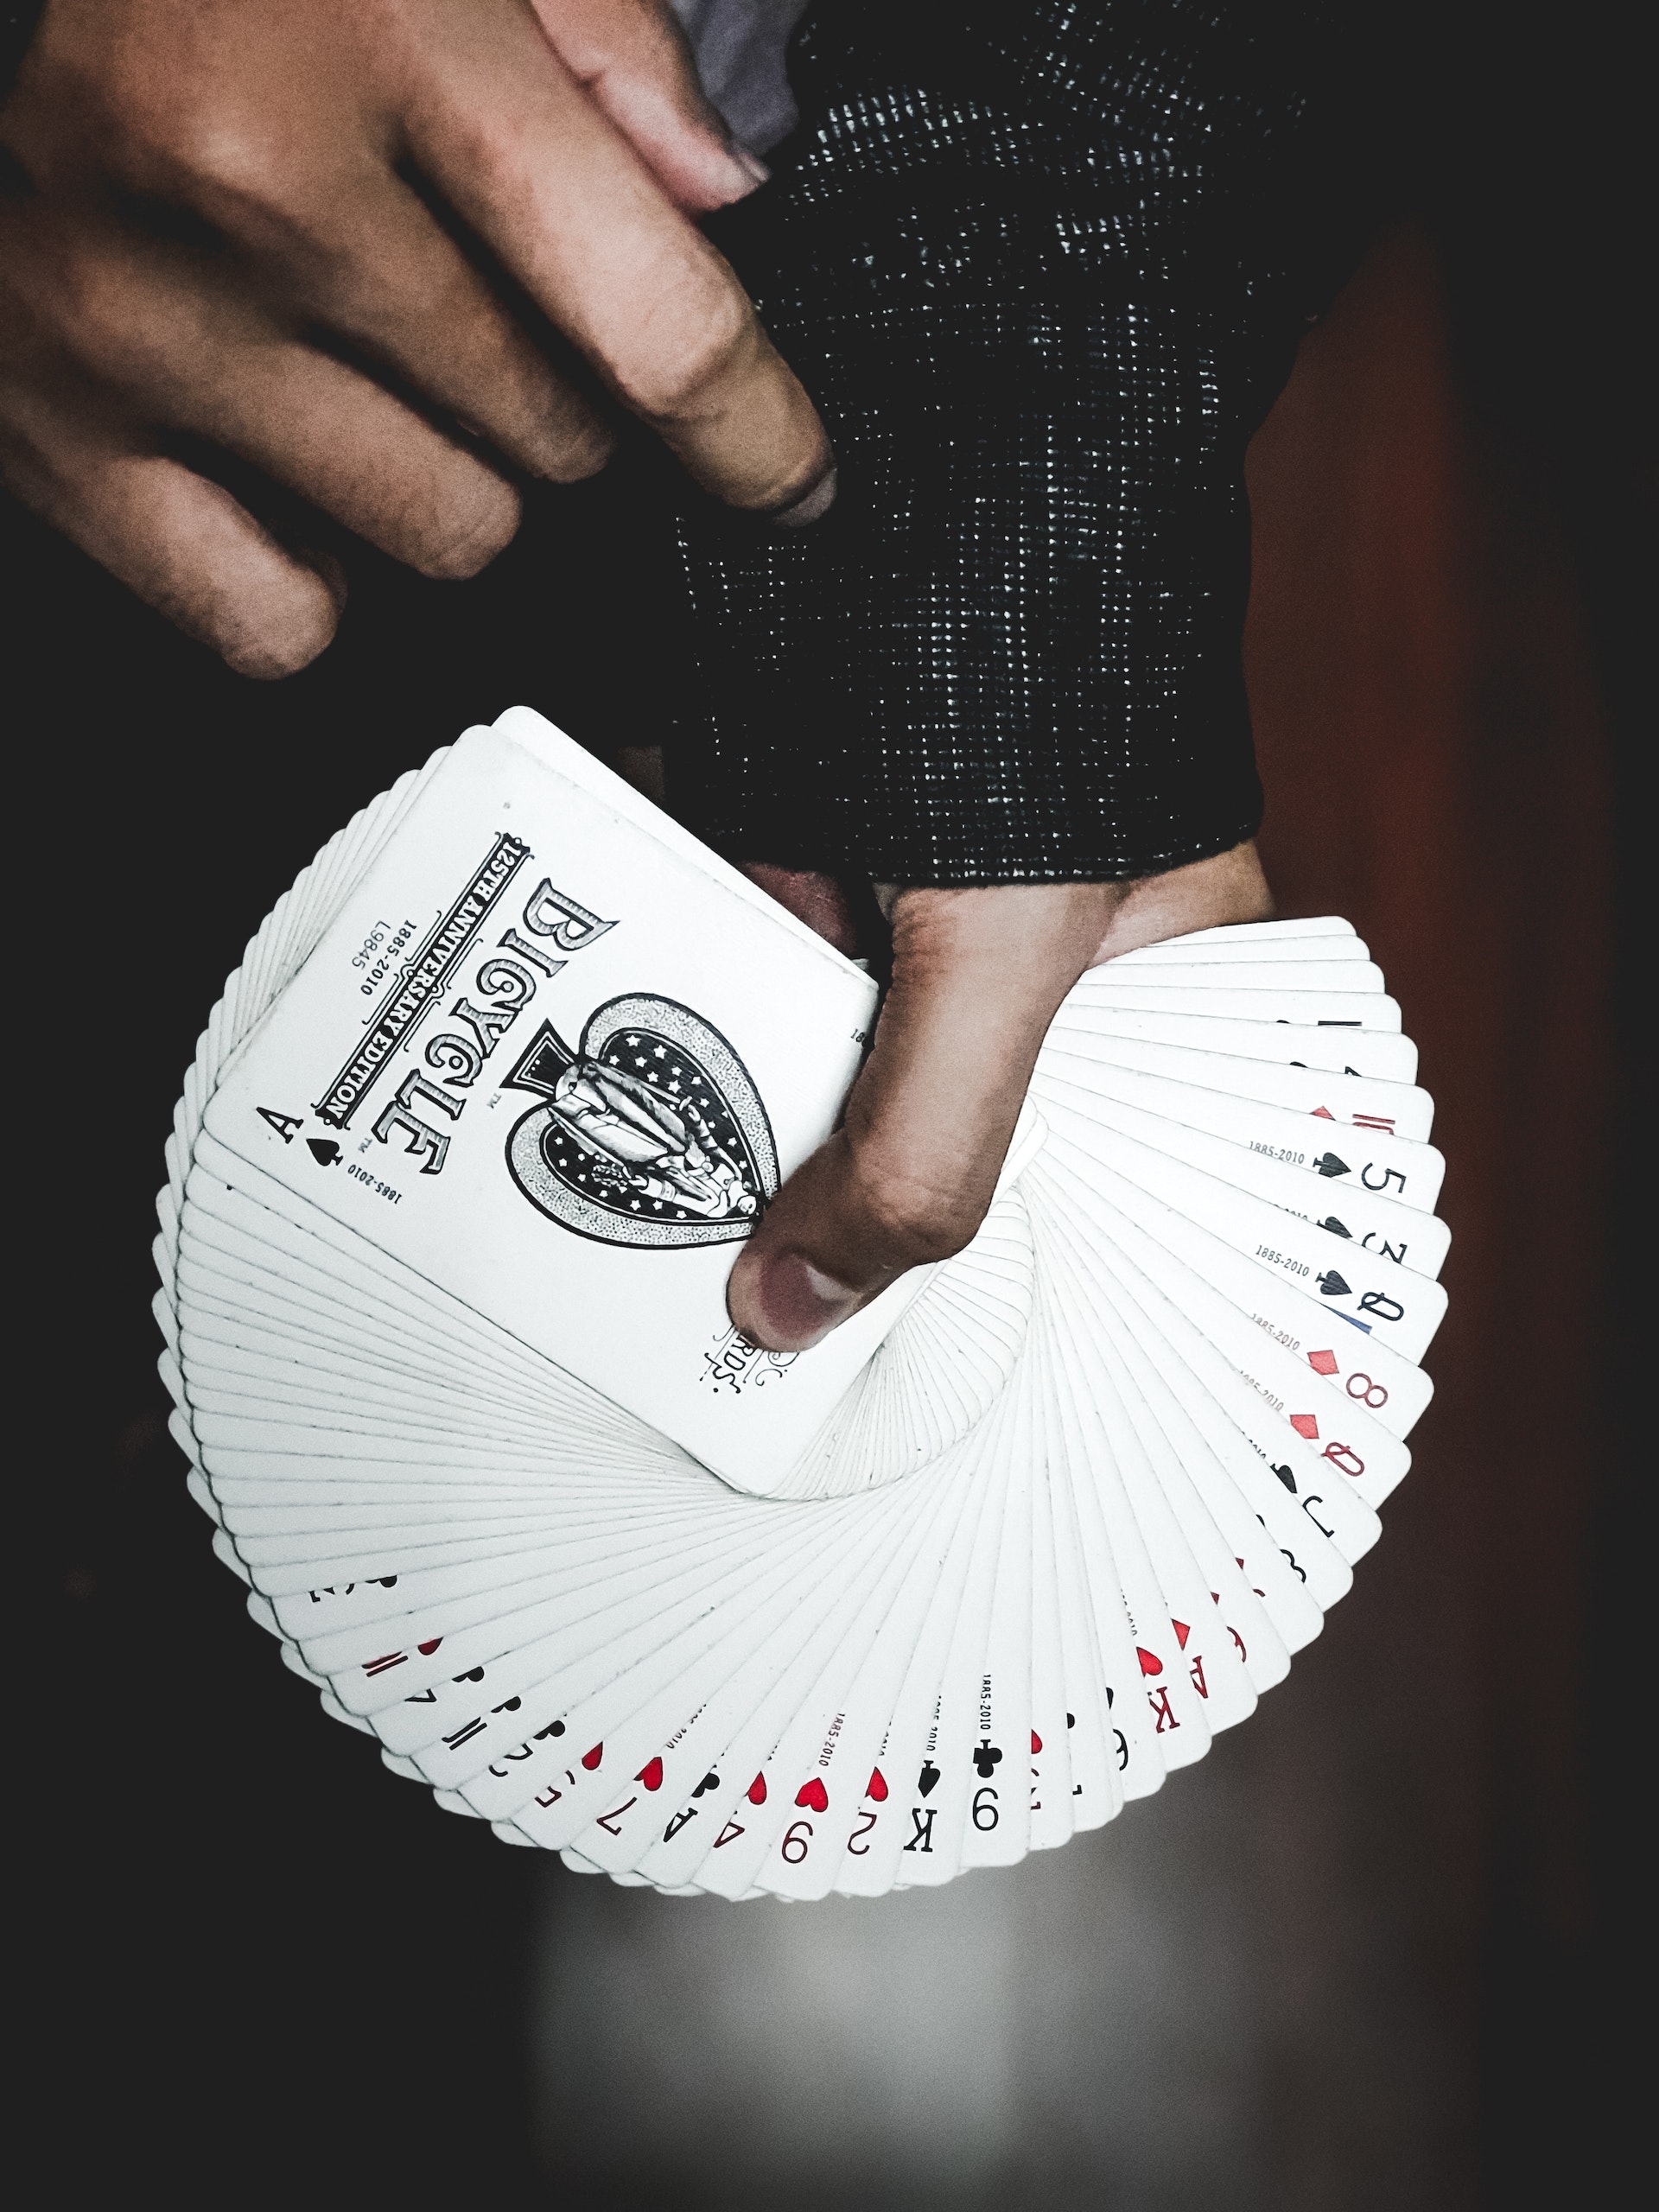 Winning Big: How To Make The Most Of Your Online Casino Experience